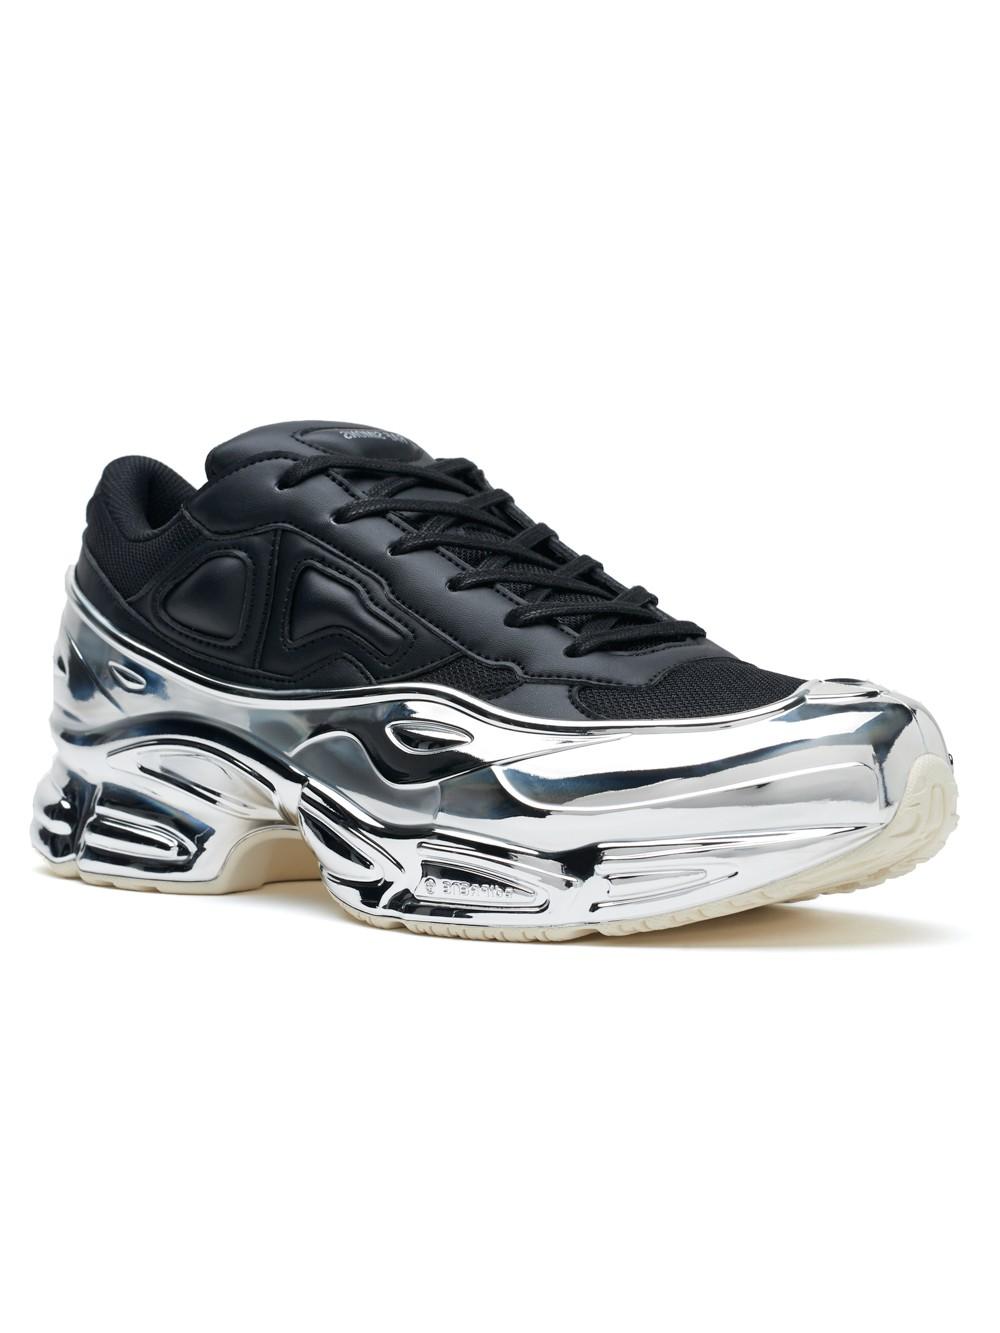 adidas X Raf Simons Black And Silver Ozweego in Black for Men - Lyst